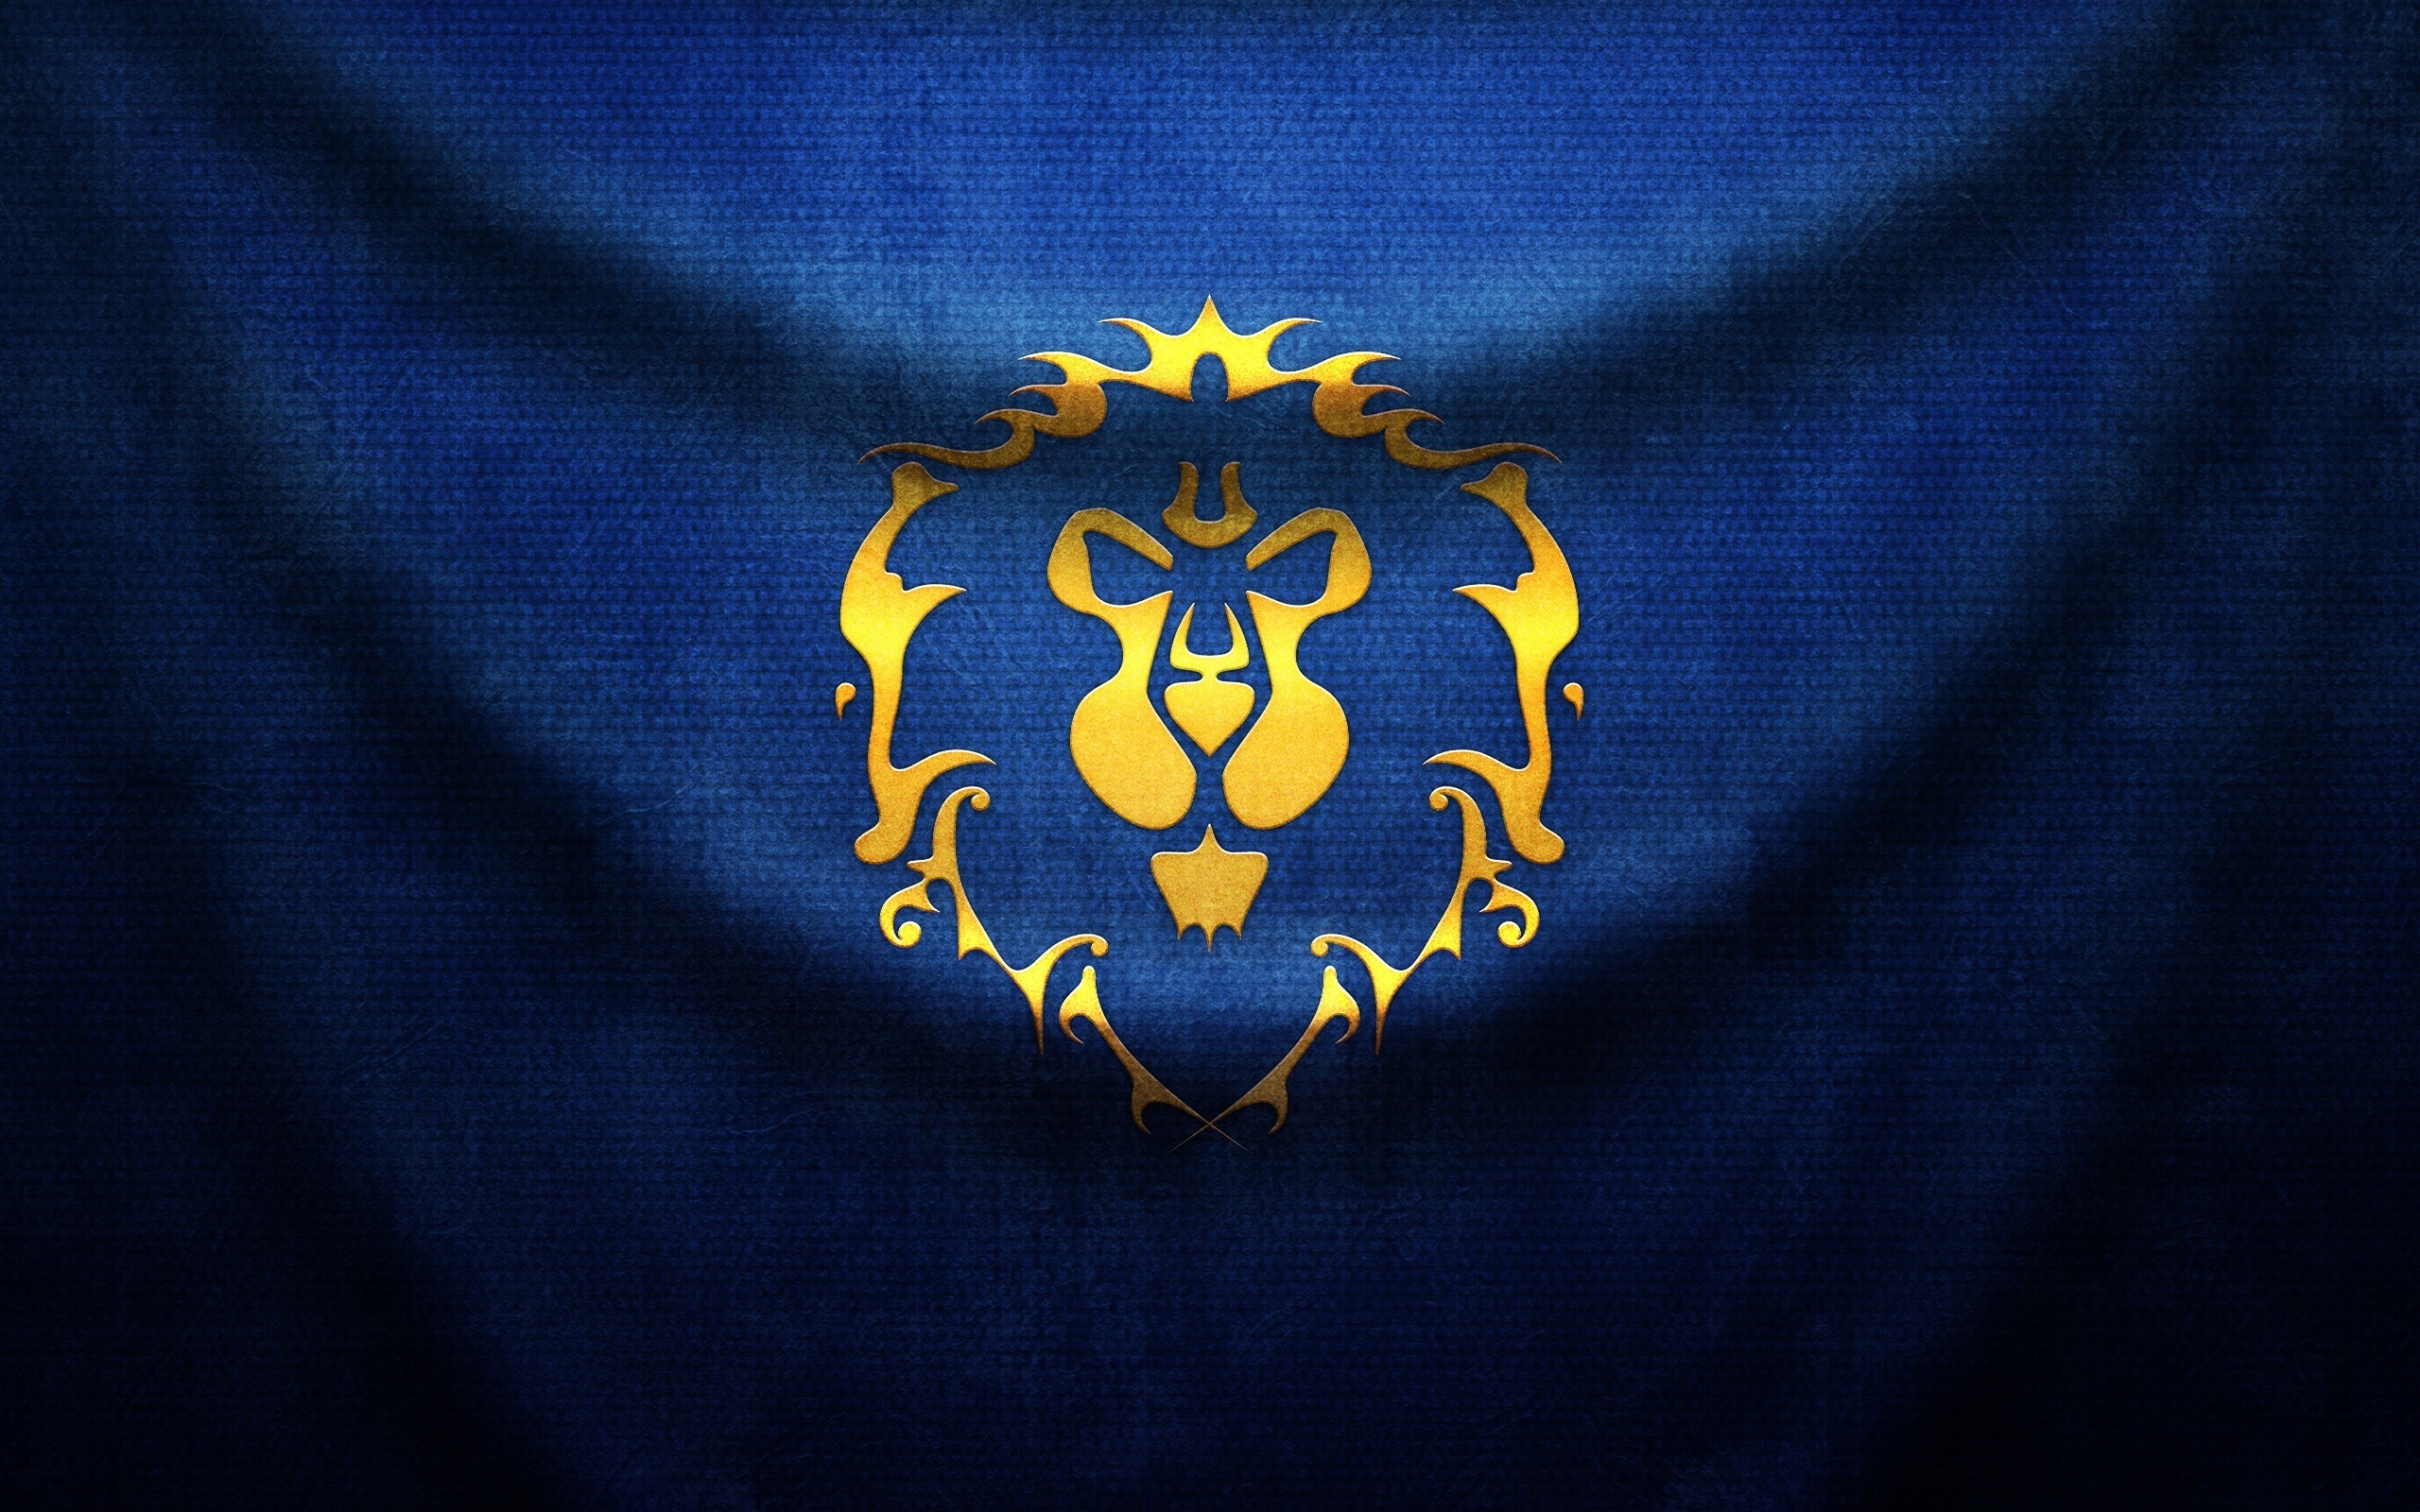 world of warcraft wow, games, background, coats of arms, blue cellphone